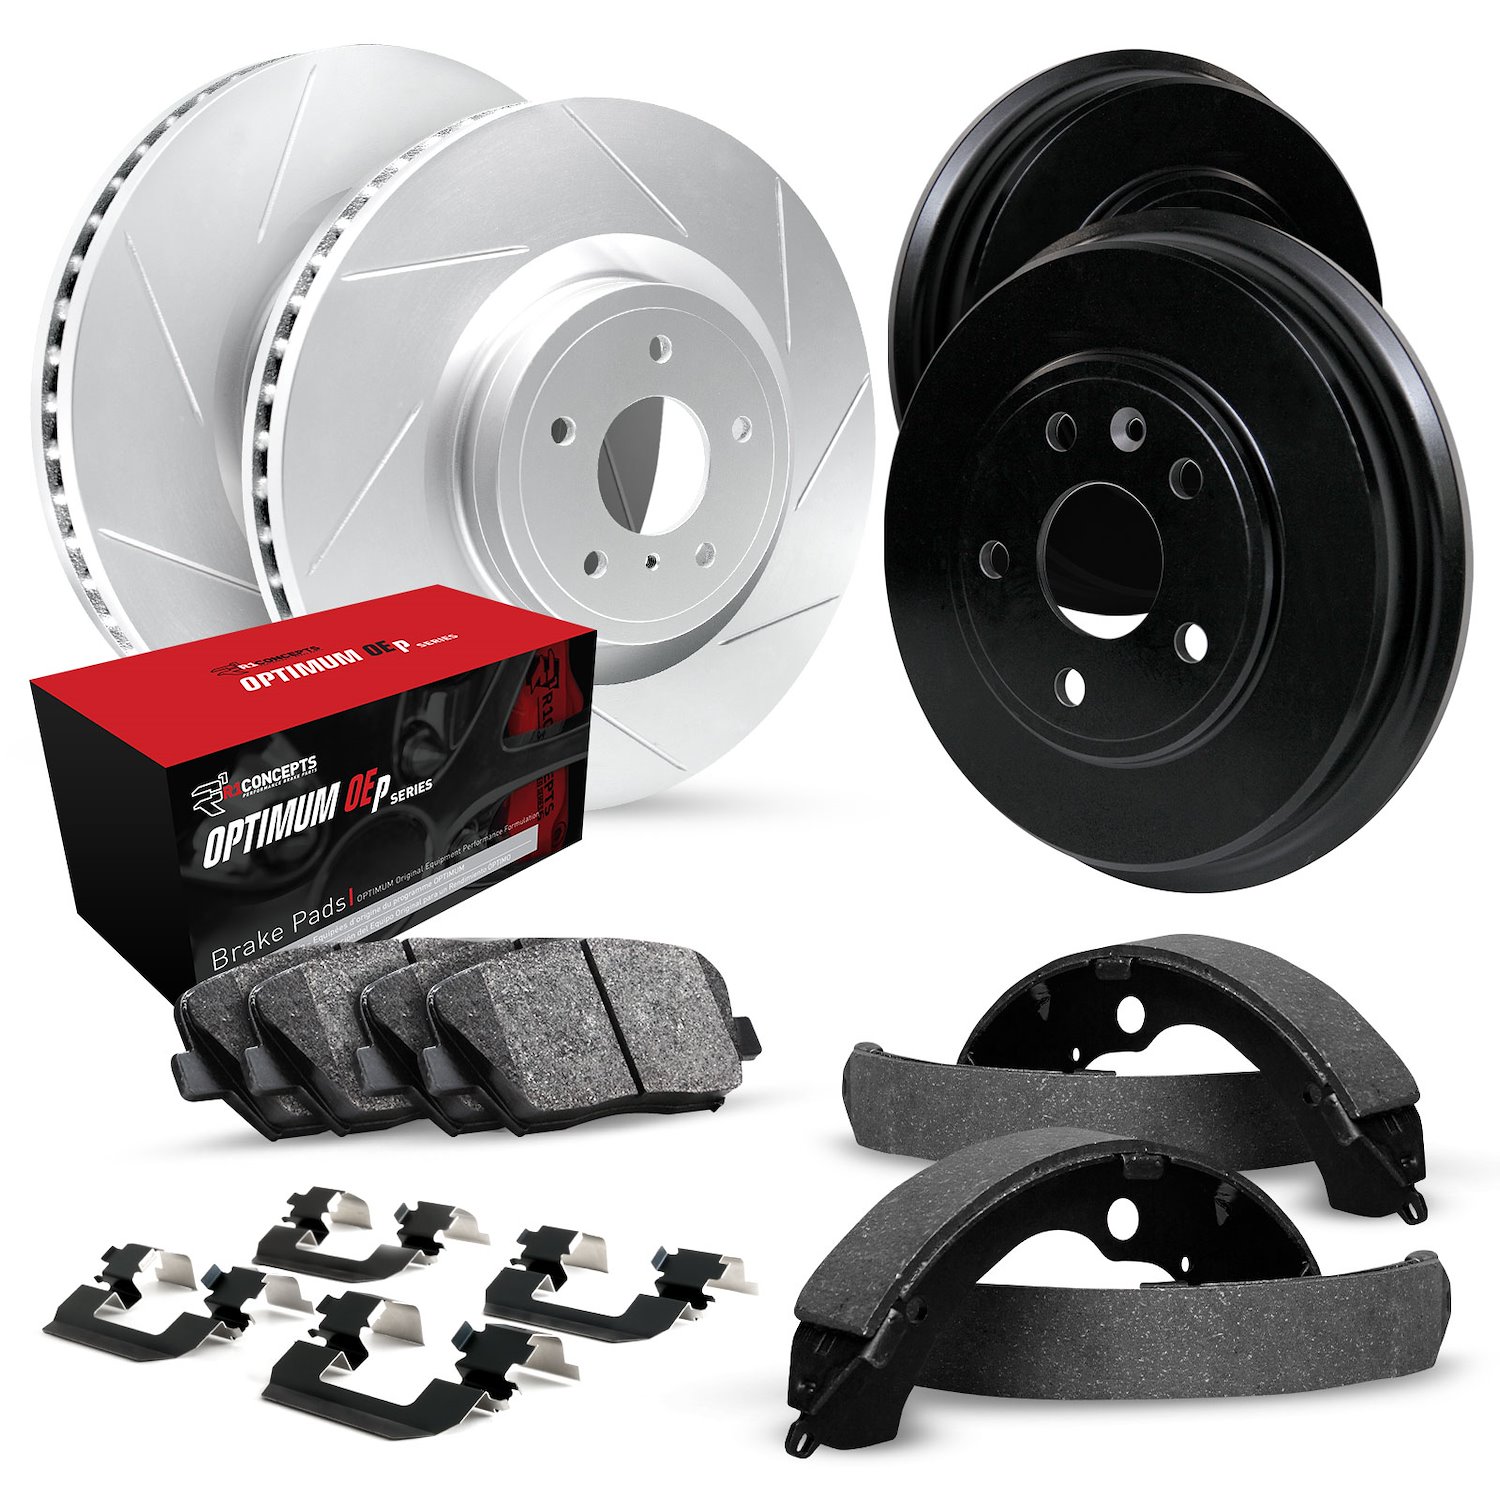 GEO-Carbon Slotted Brake Rotor & Drum Set w/Optimum OE Pads, Shoes, & Hardware, 1981-1989 GM, Position: Front & Rear